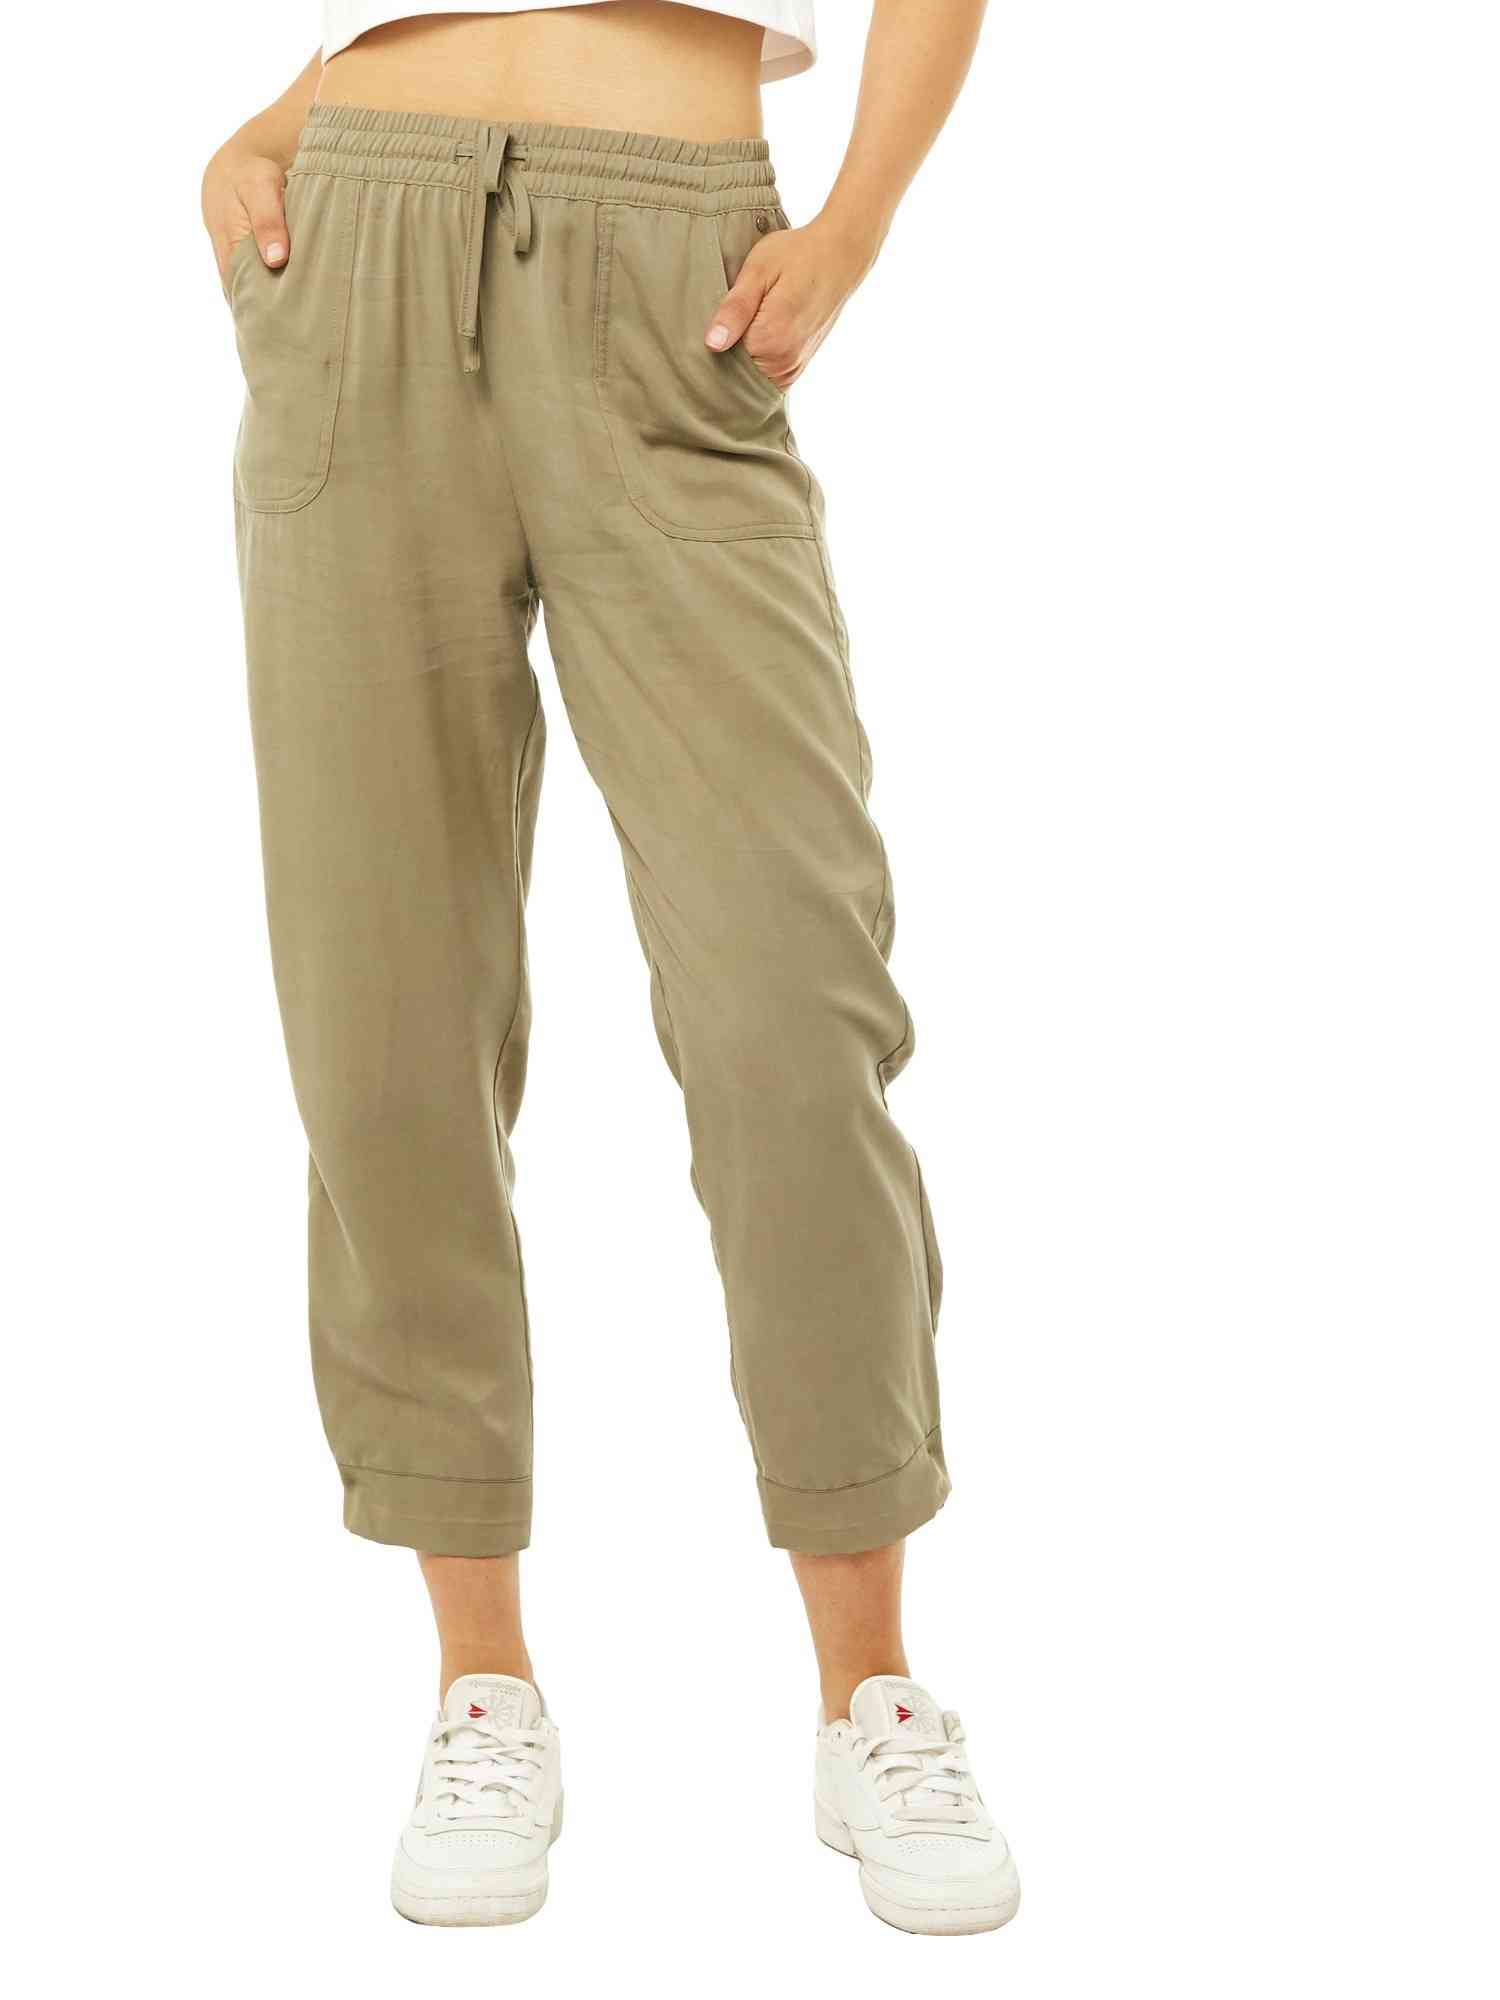 Rusty Bounds Slouchy Pant - Army Rusty Australia, 10 / Army